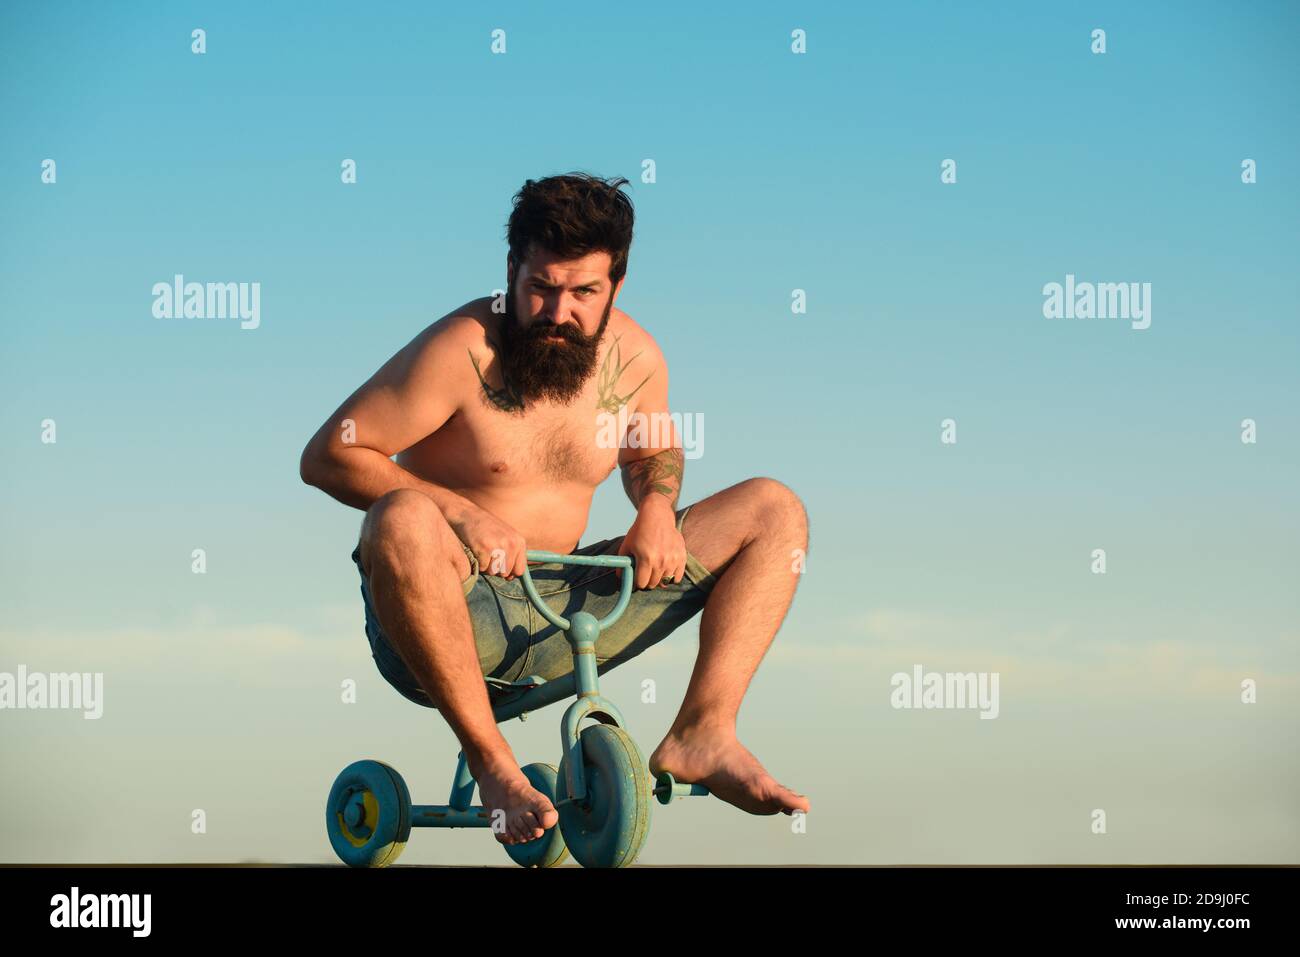 Funny man on a bicycle. Emotional crazy guy on a childrens bike. Crazy man riding a small bicycle. Stock Photo